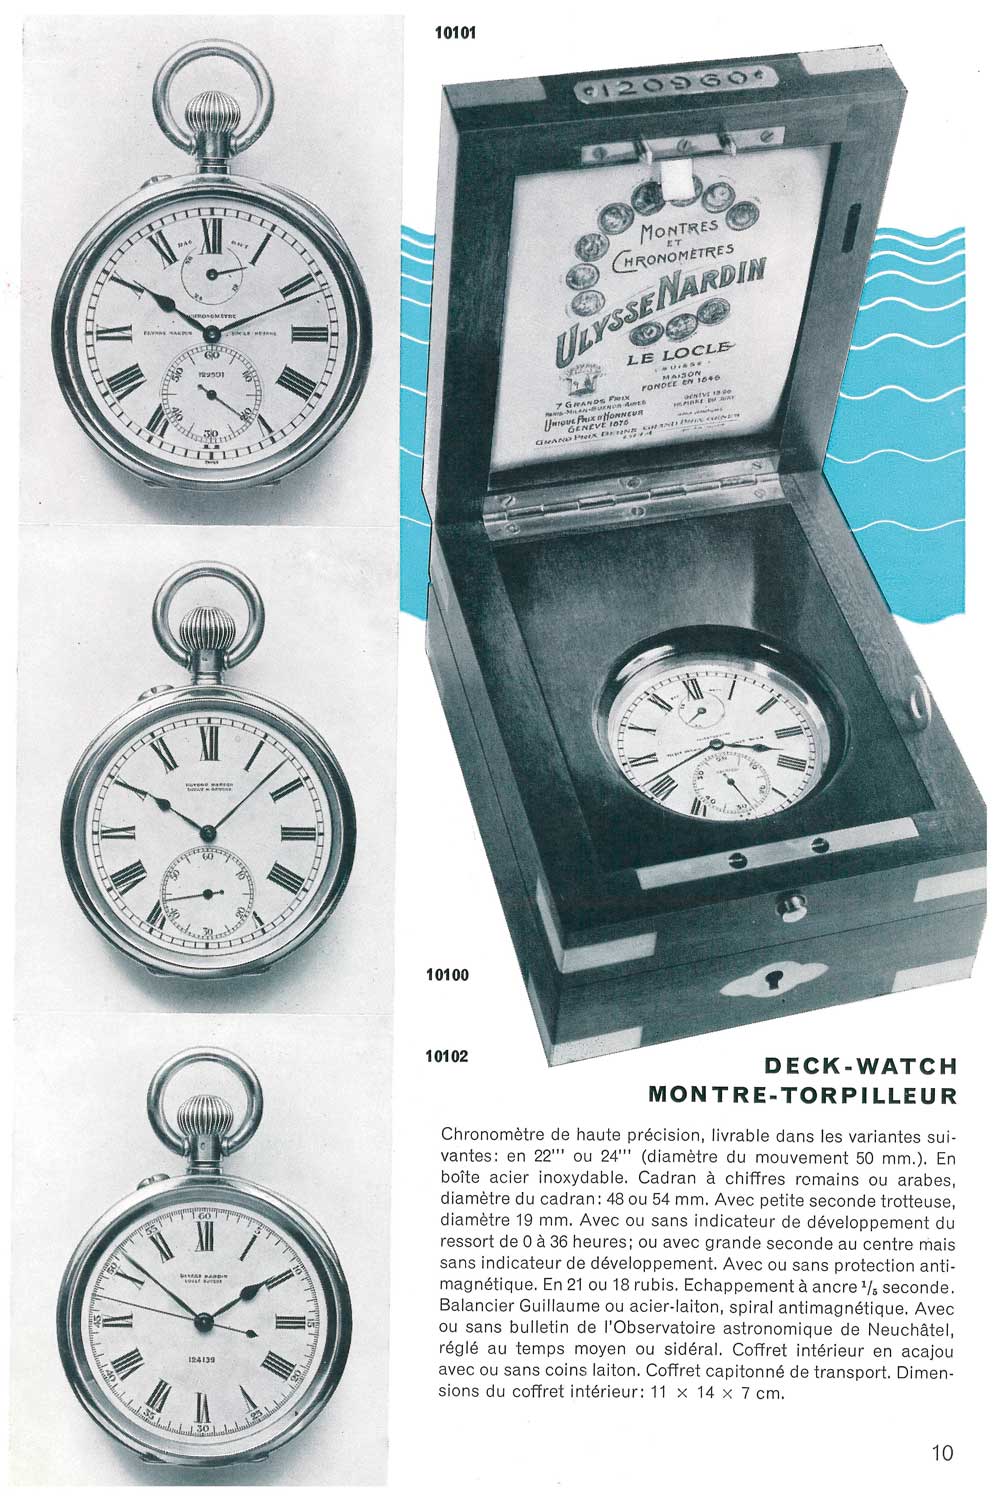 An article about the Ulysse Nardin Deck Chronometer made for “torpedo boats”